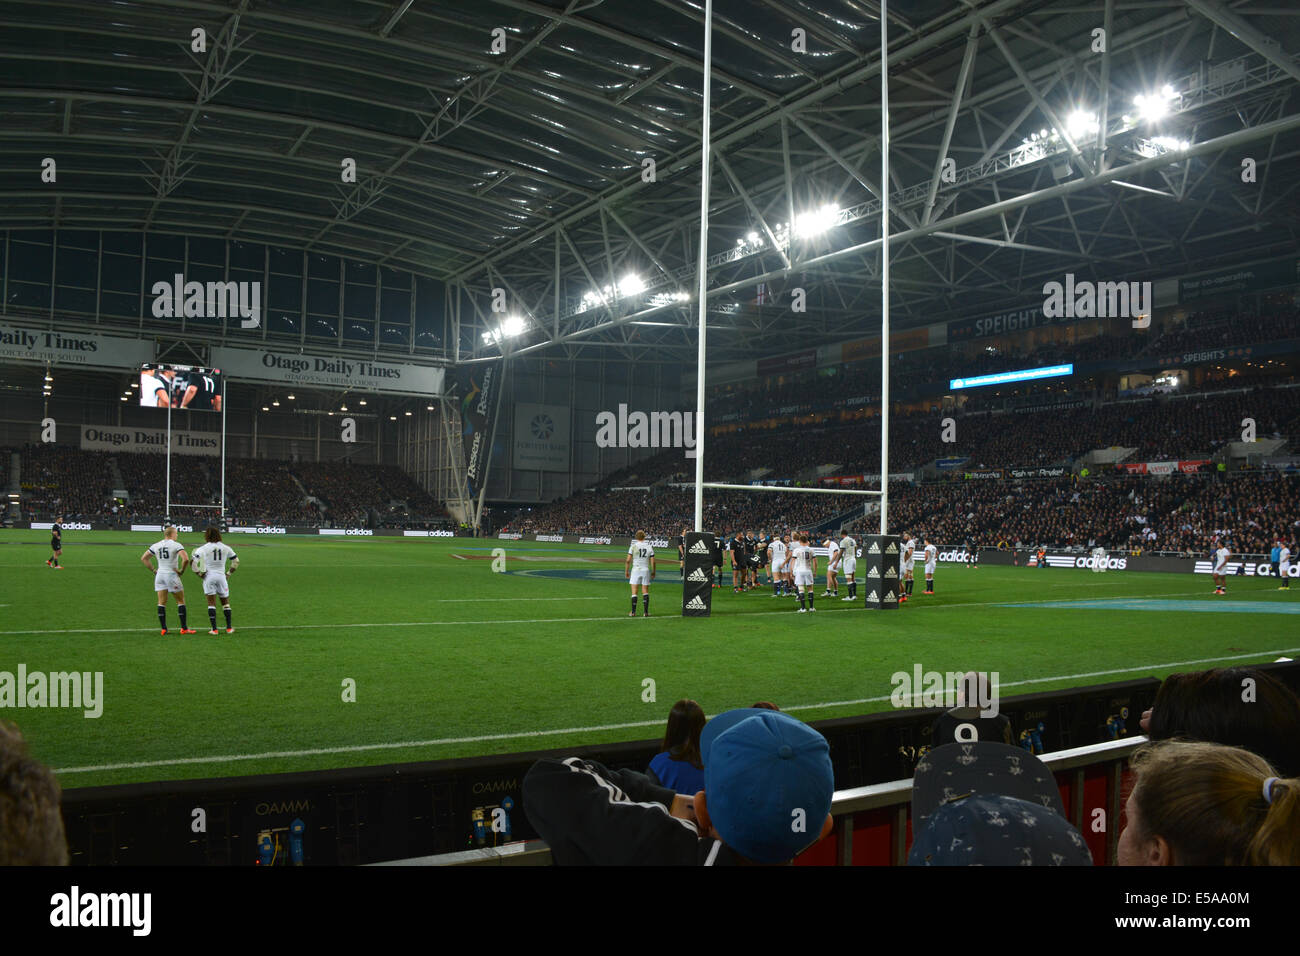 Interior view of the Forsyth Barr Stadium in Dunedin during the All Blacks Vs England rugby game played on June 14, 2014 Stock Photo